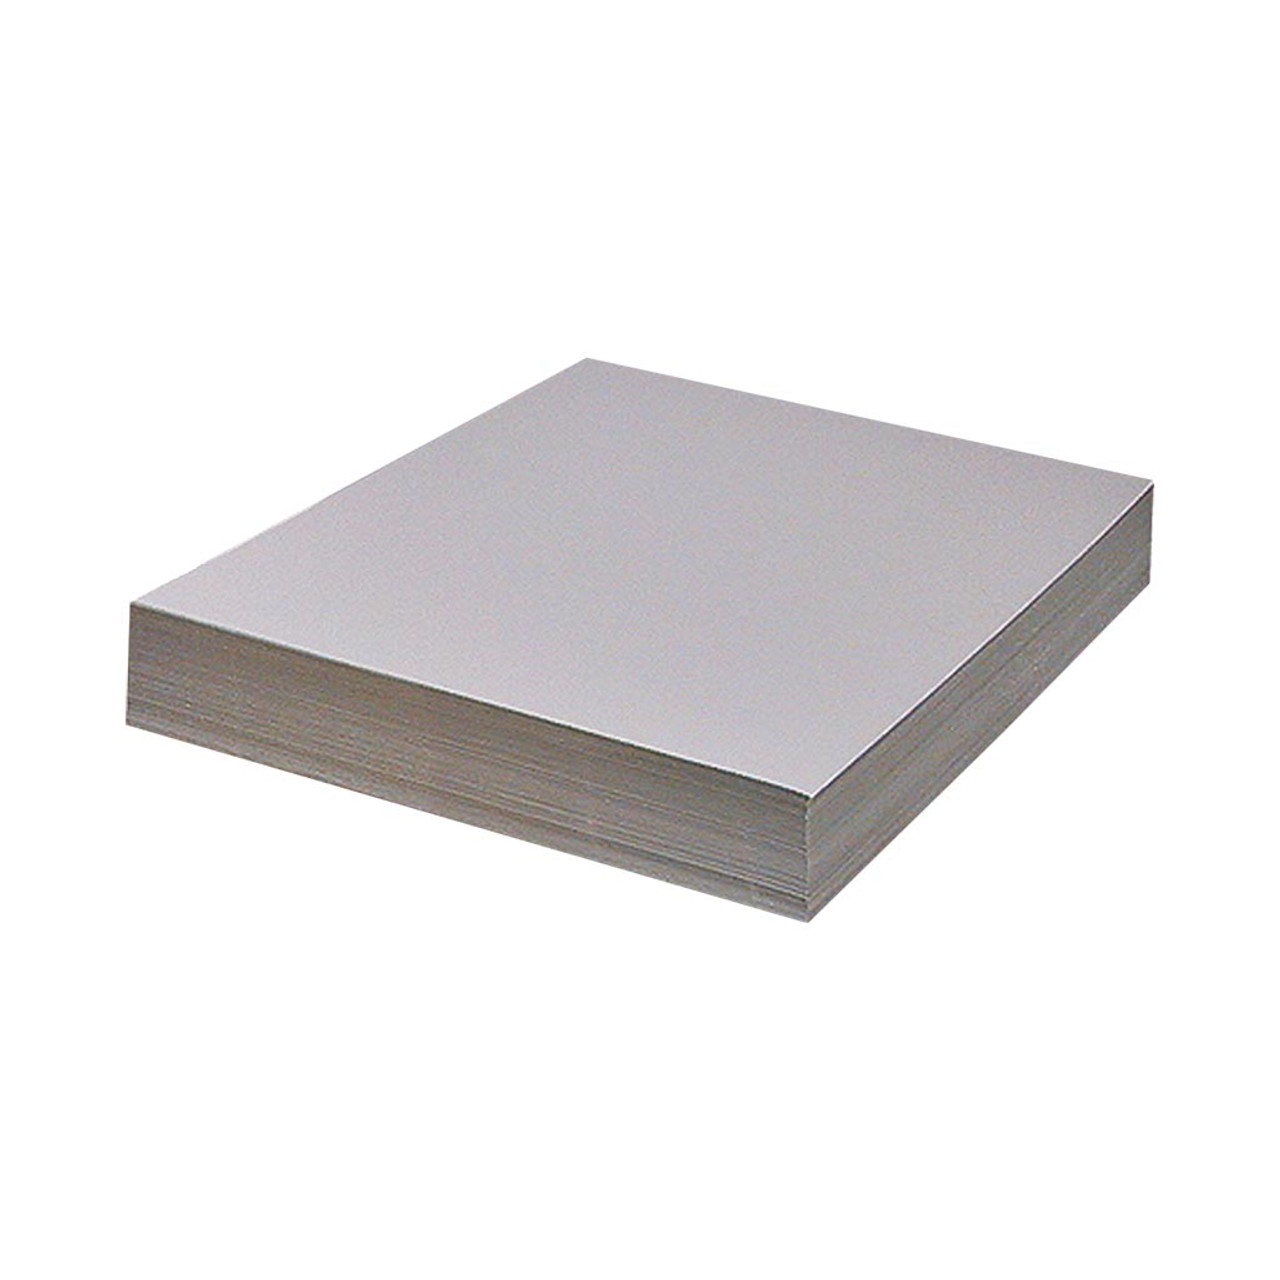 Pacon Heavyweight Drawing Paper, Gray Bogus 18 x 24 250 Sheets - Midwest  Technology Products